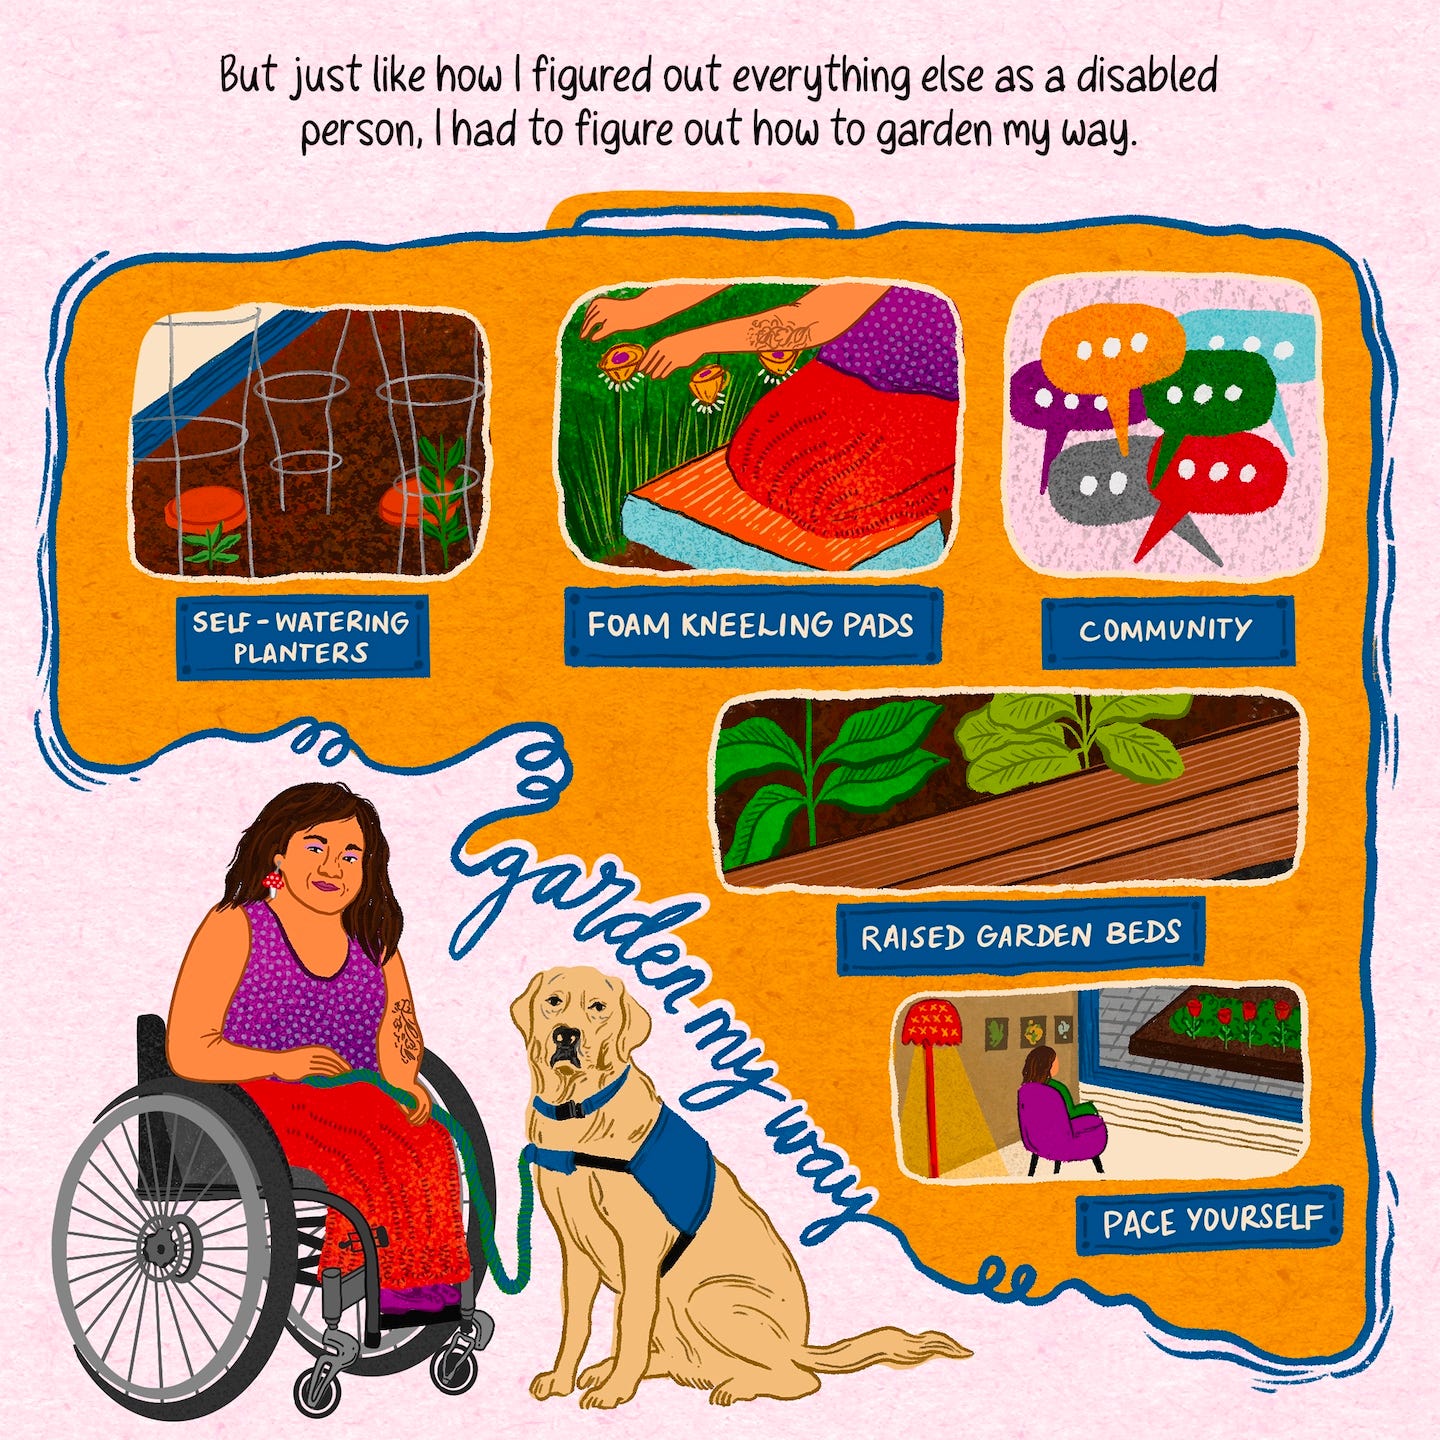 A disabled woman in her manual wheelchair, next to her service dog, with several support systems for disabled gardening: self-watering planters, foam kneeling pads, community, raised garden beds, and pace yourself.